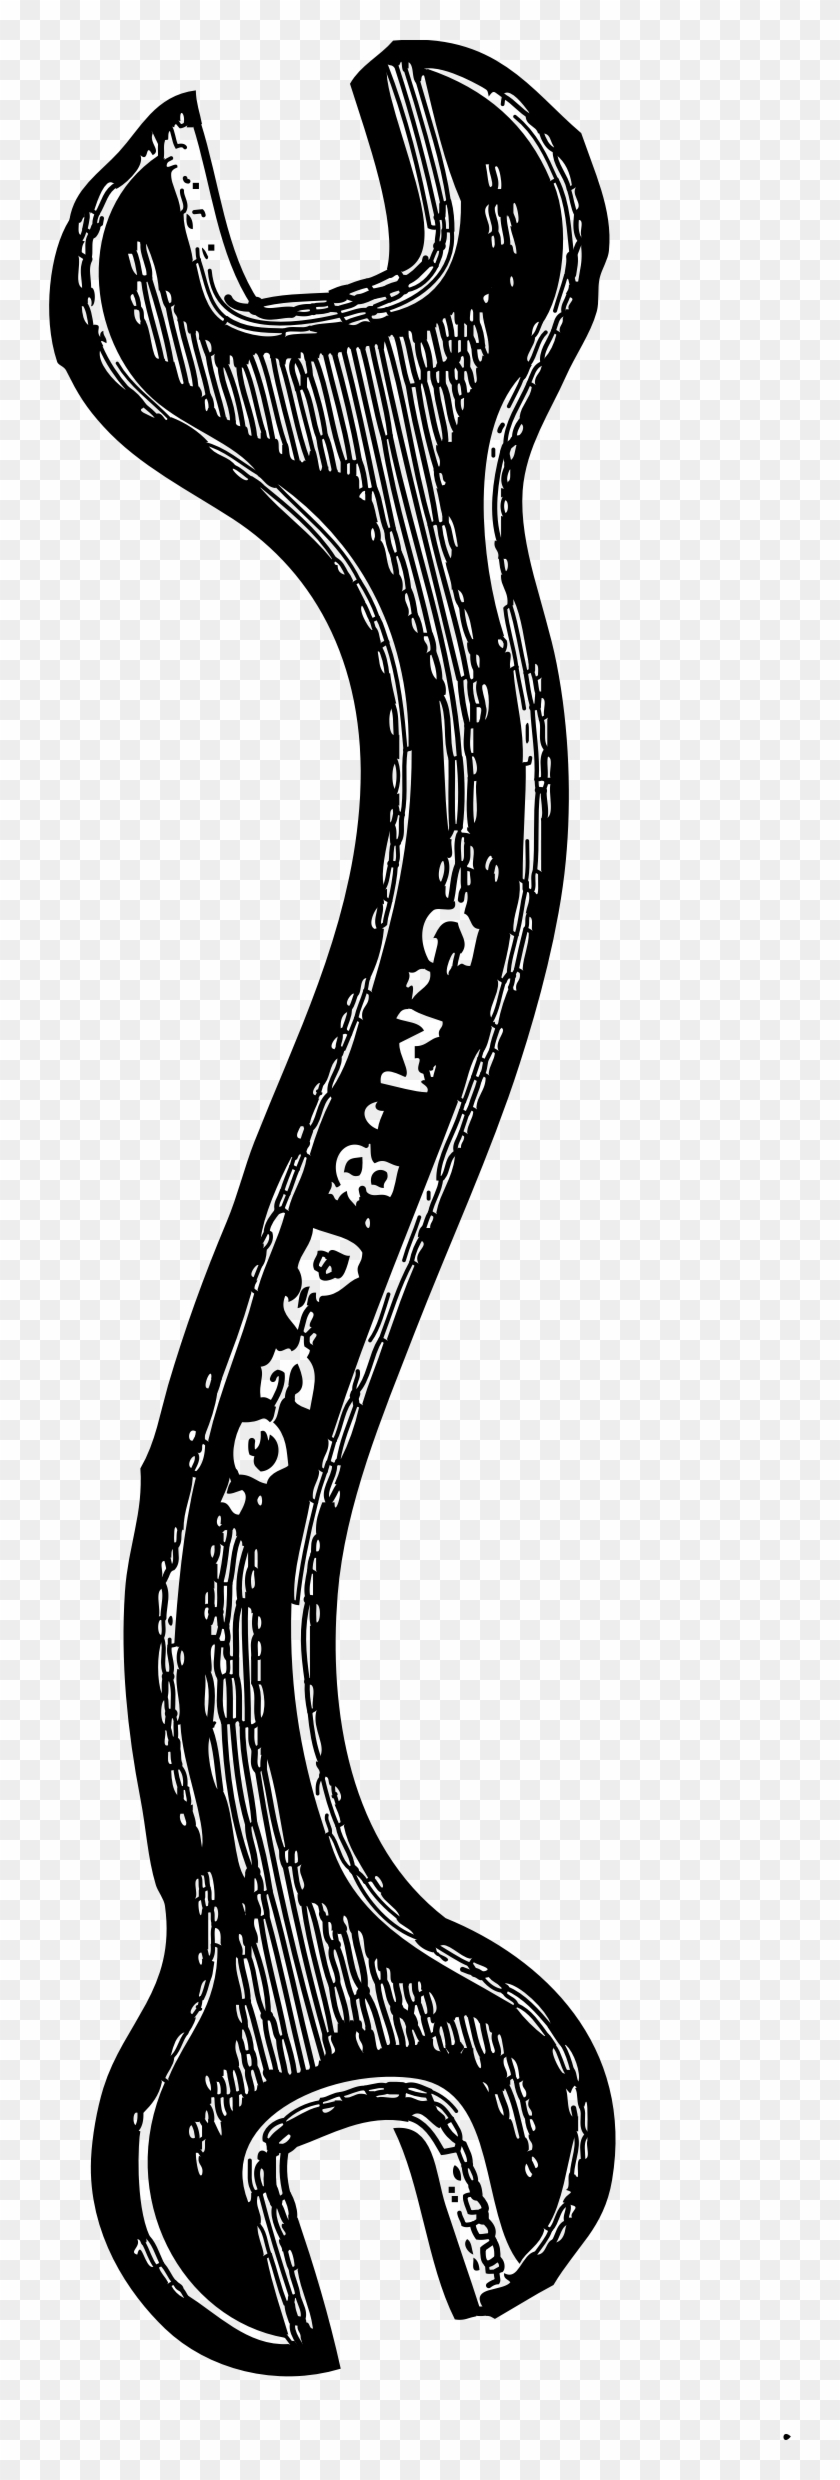 Double Open End Wrench Vector Clip Art - Wrench Clip Art #291907